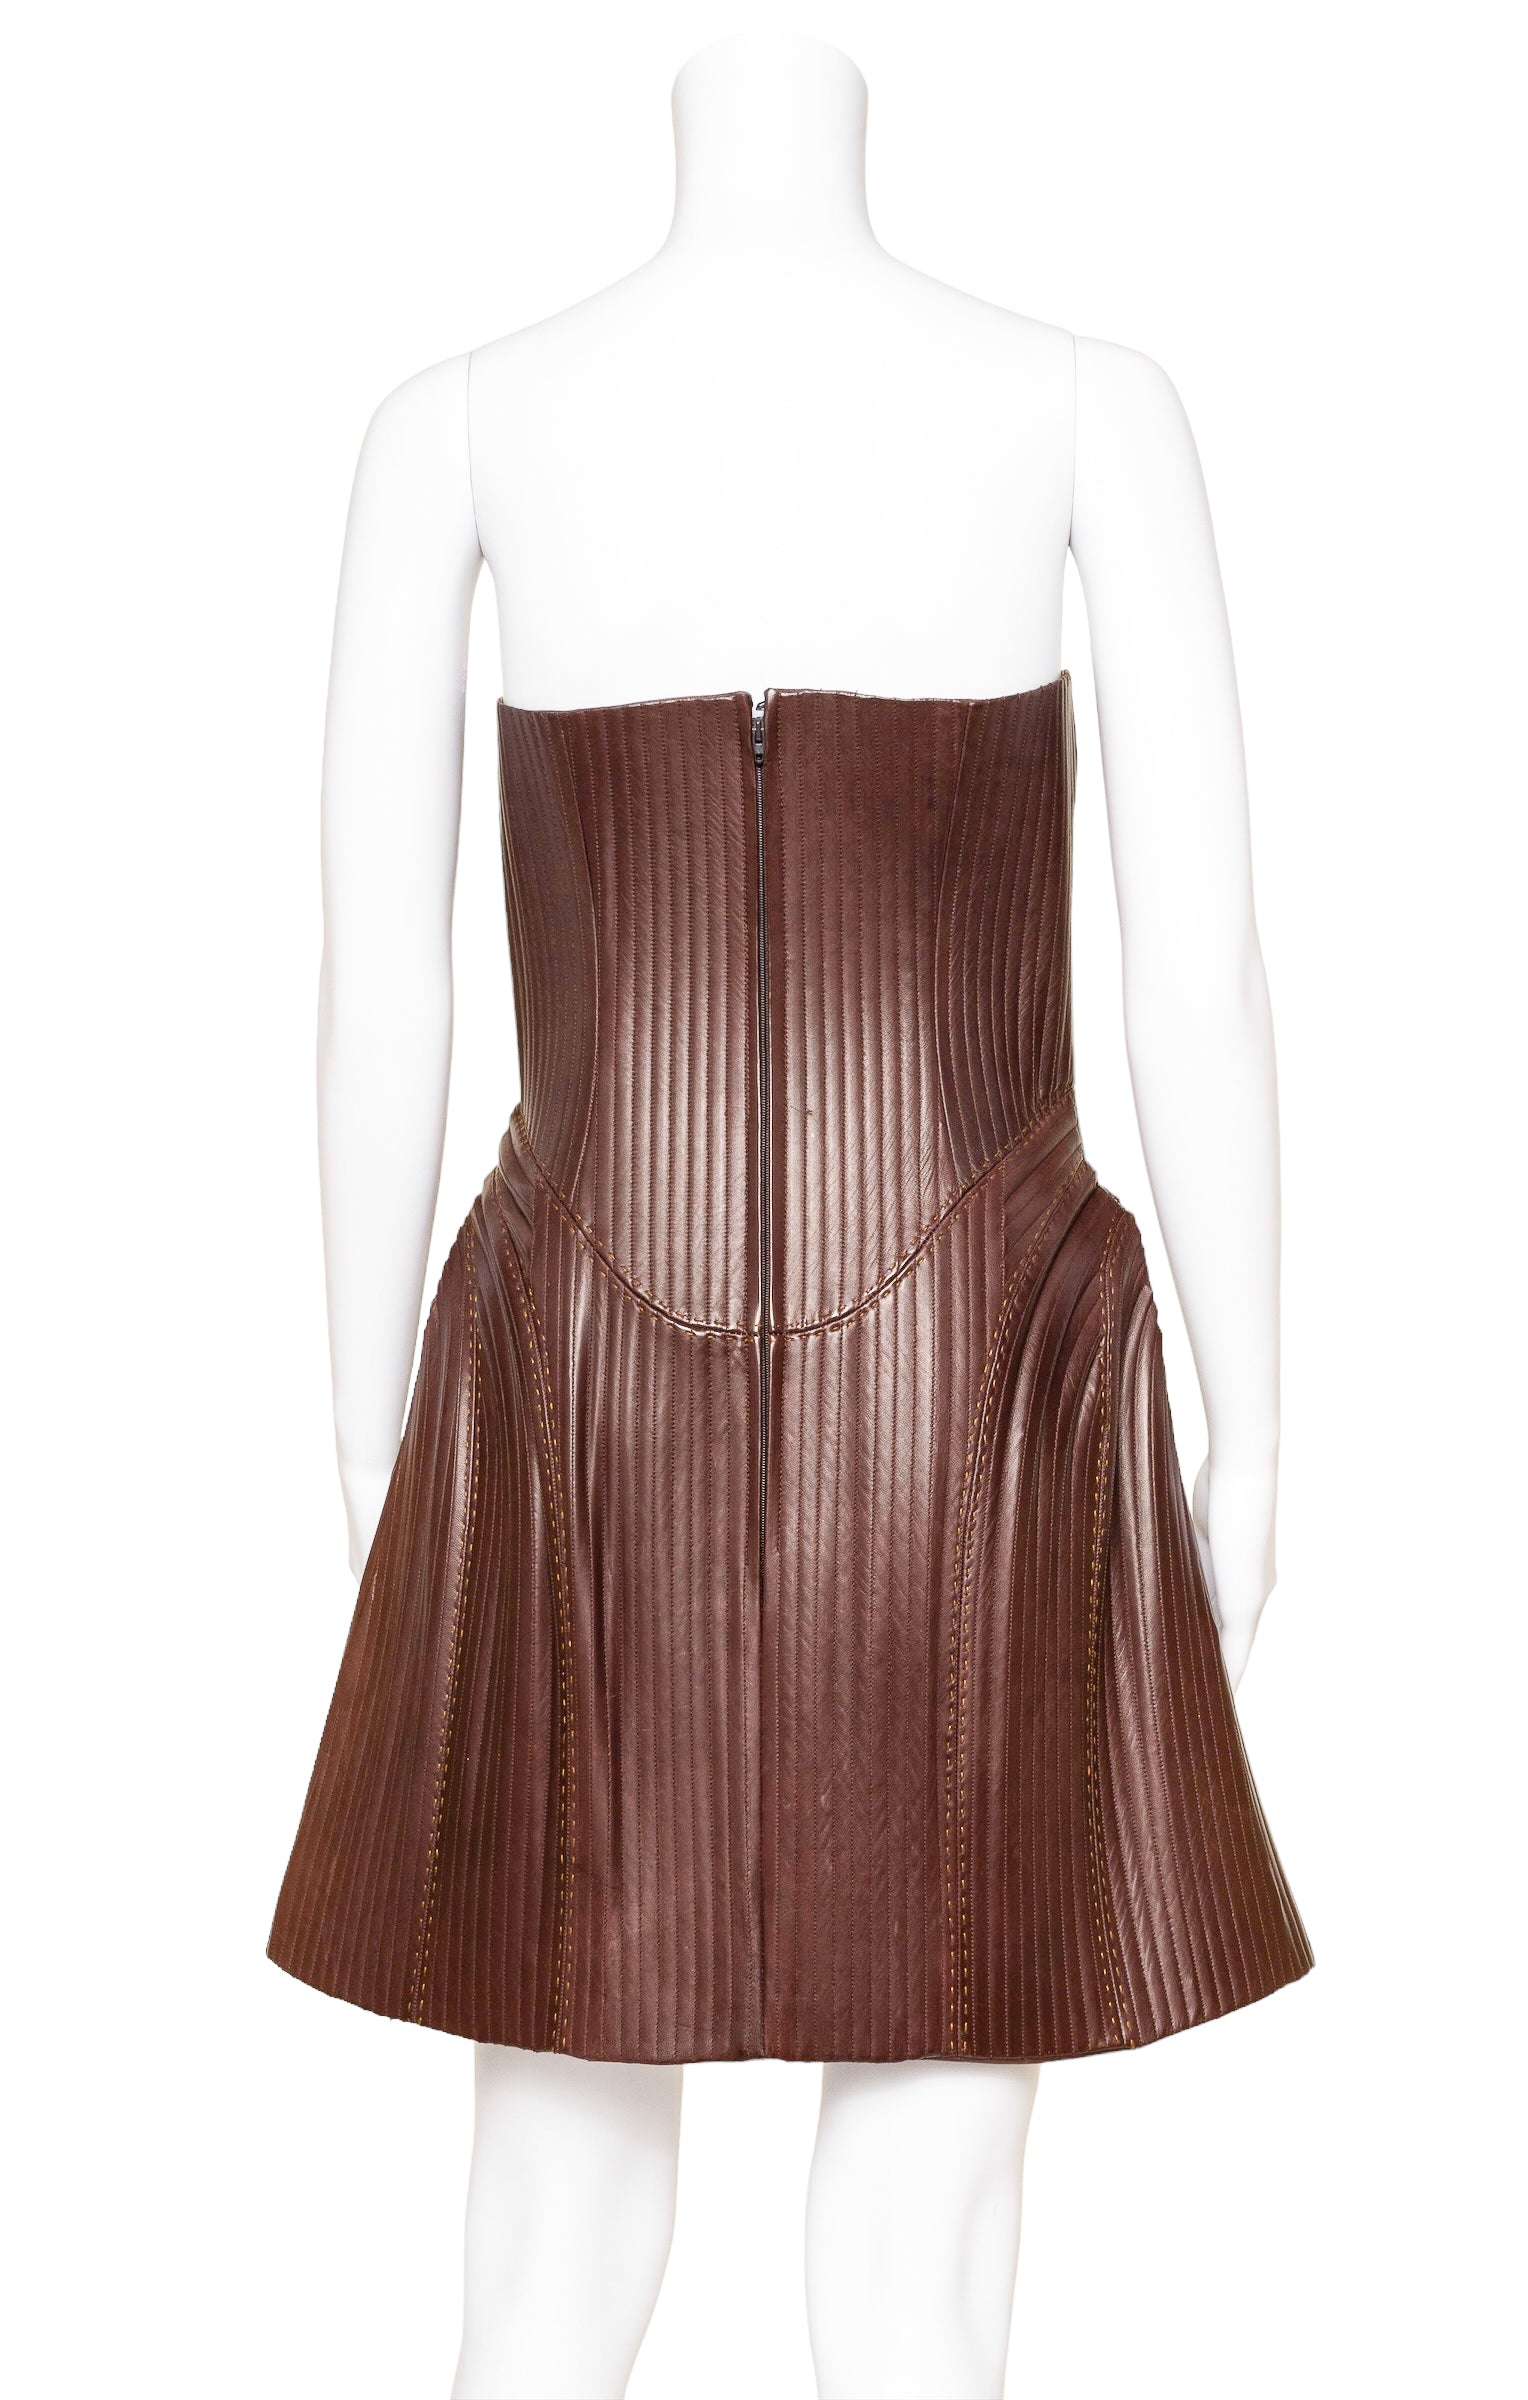 ALEXANDER MCQUEEN (RARE) Dress Size: IT 42 / Comparable to US 4-6